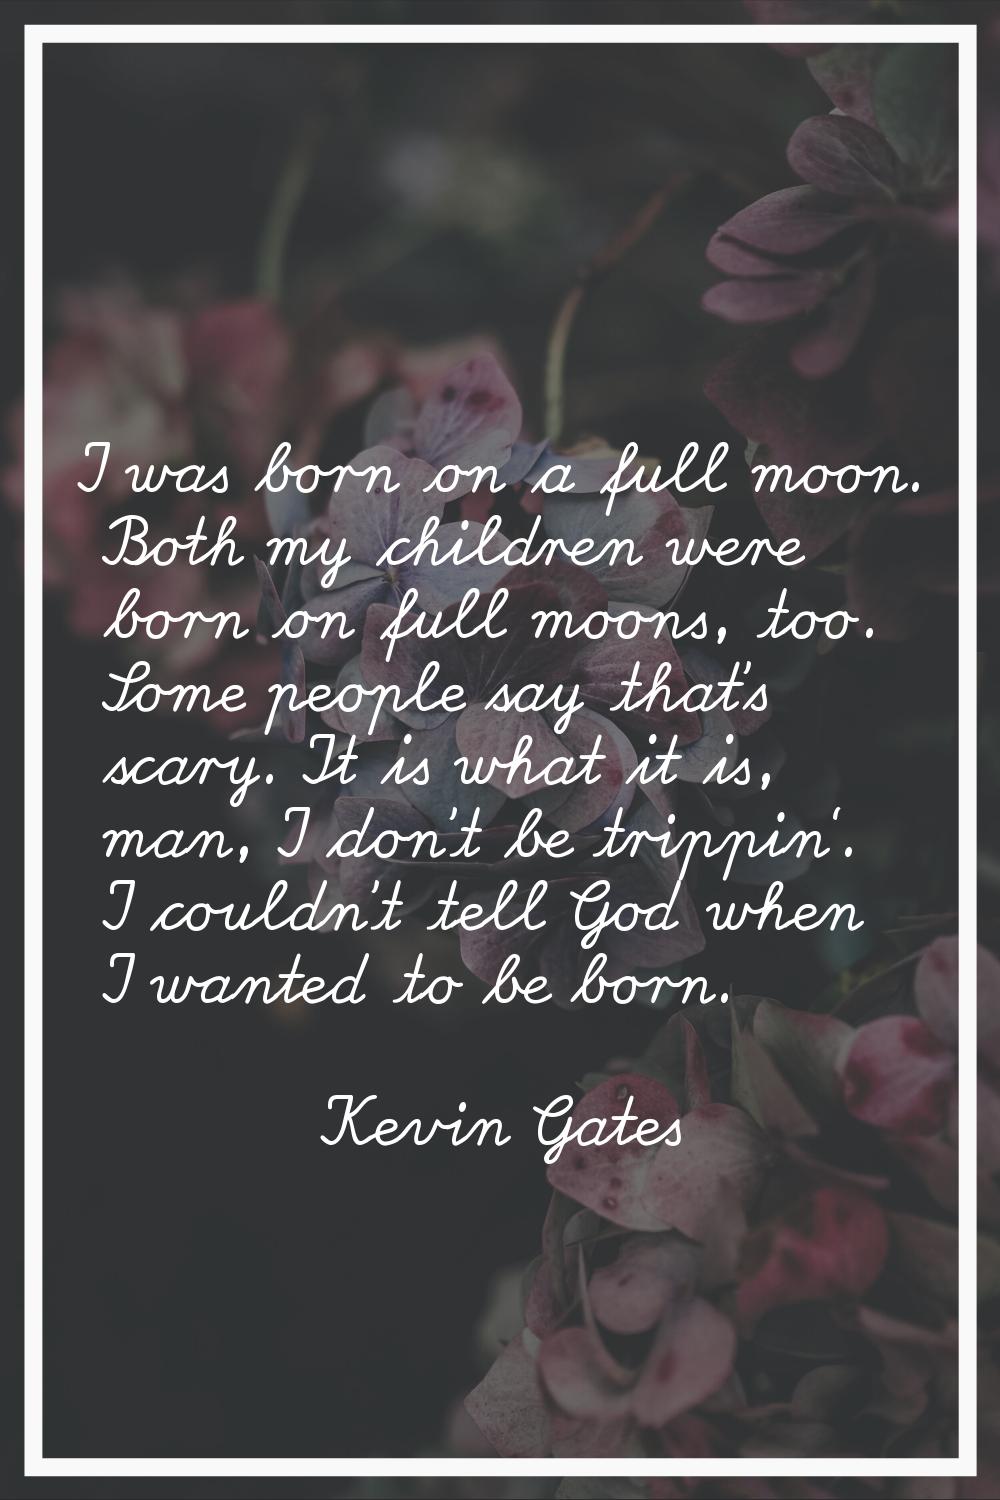 I was born on a full moon. Both my children were born on full moons, too. Some people say that's sc